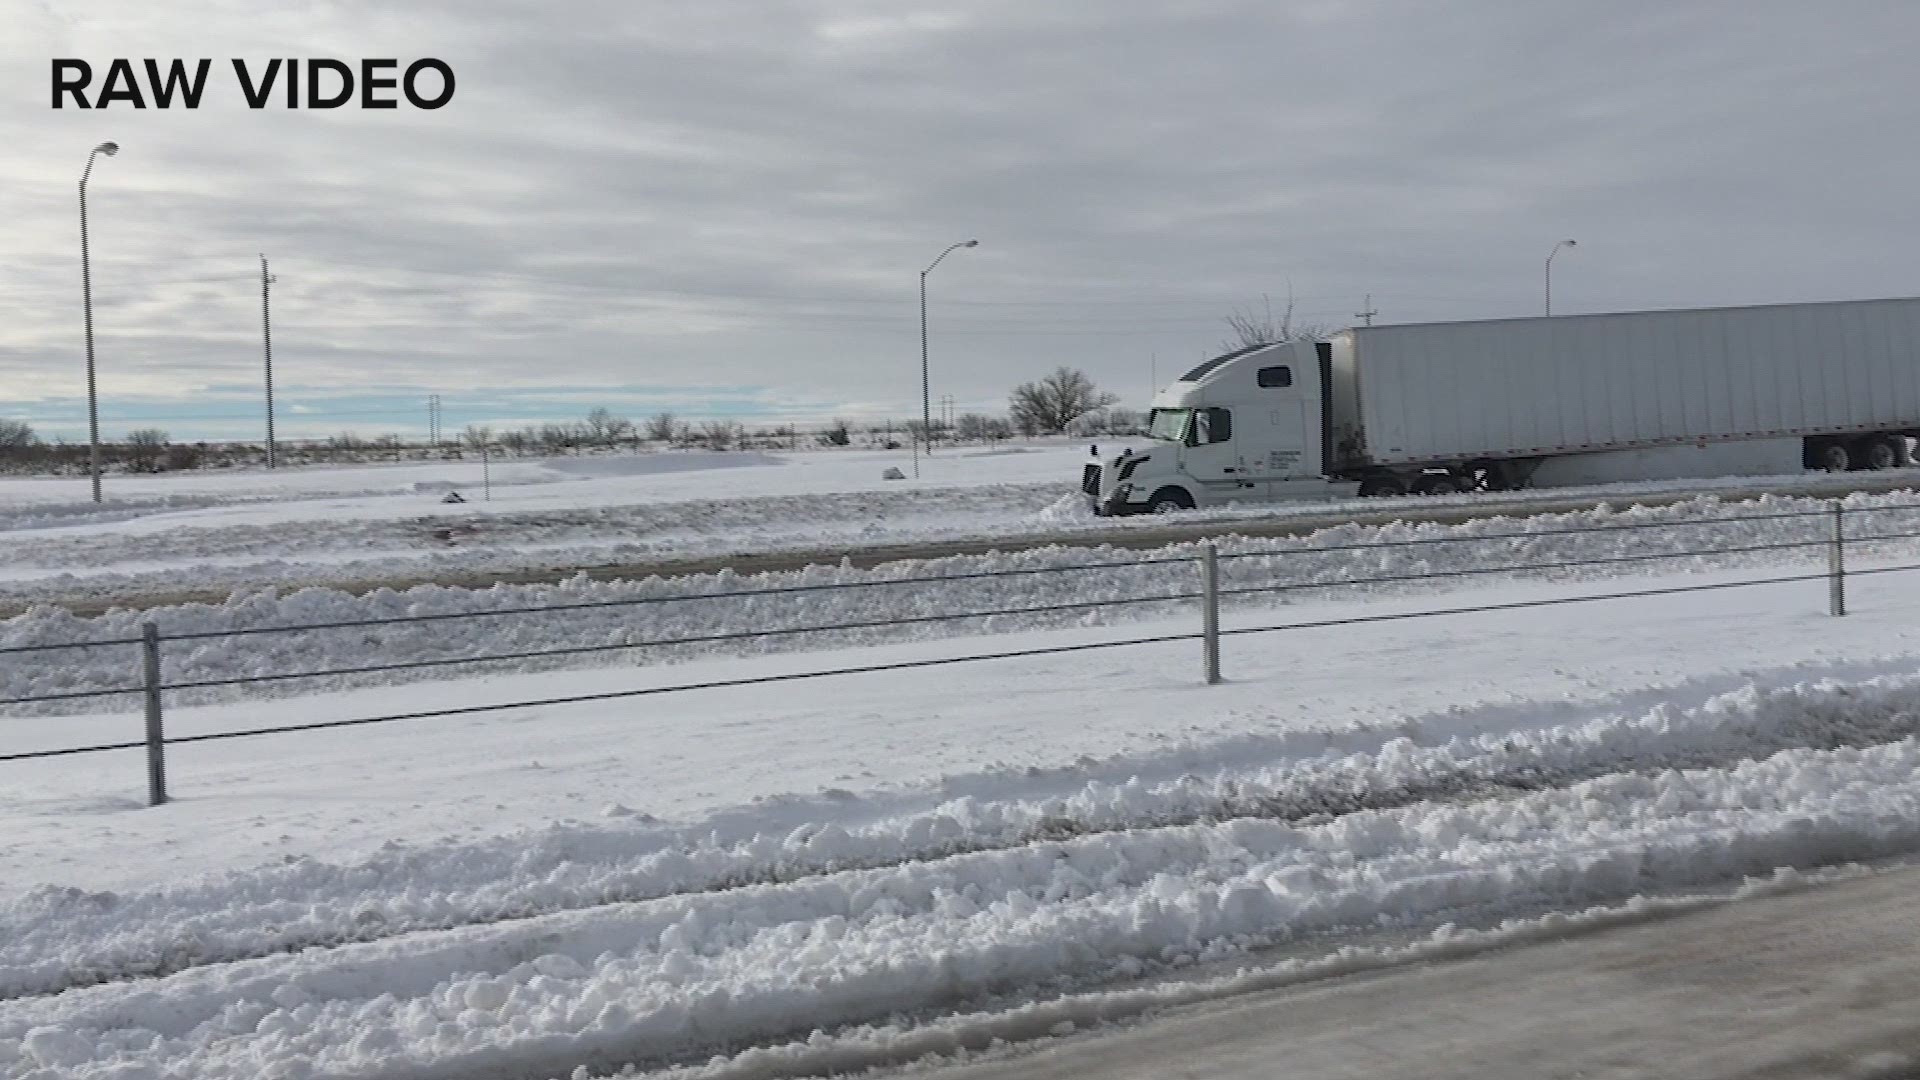 Motorists were stranded for more than half a day on Interstate 20 in West Texas.